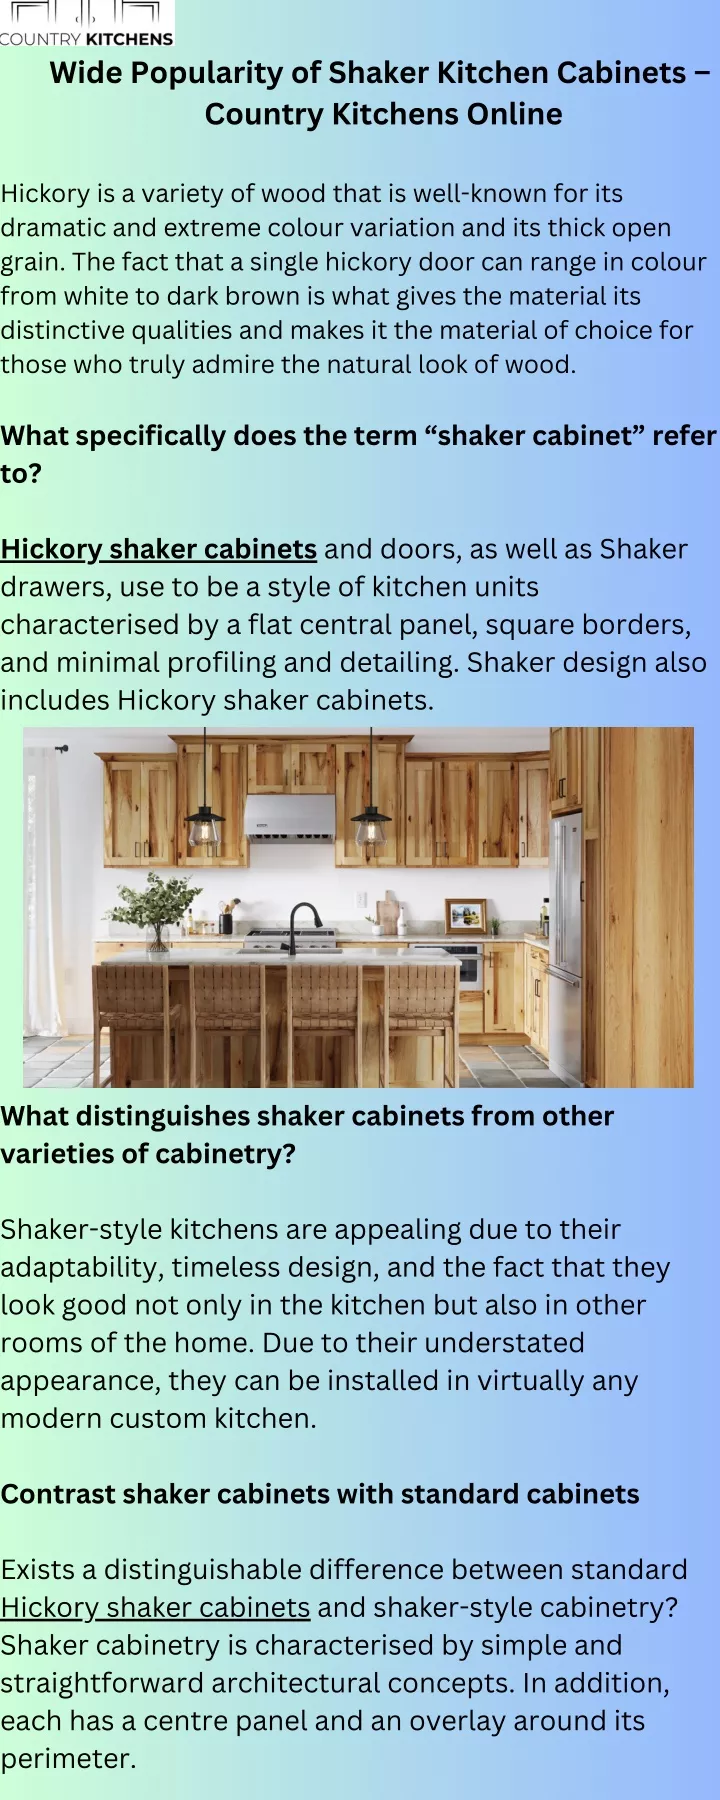 wide popularity of shaker kitchen cabinets